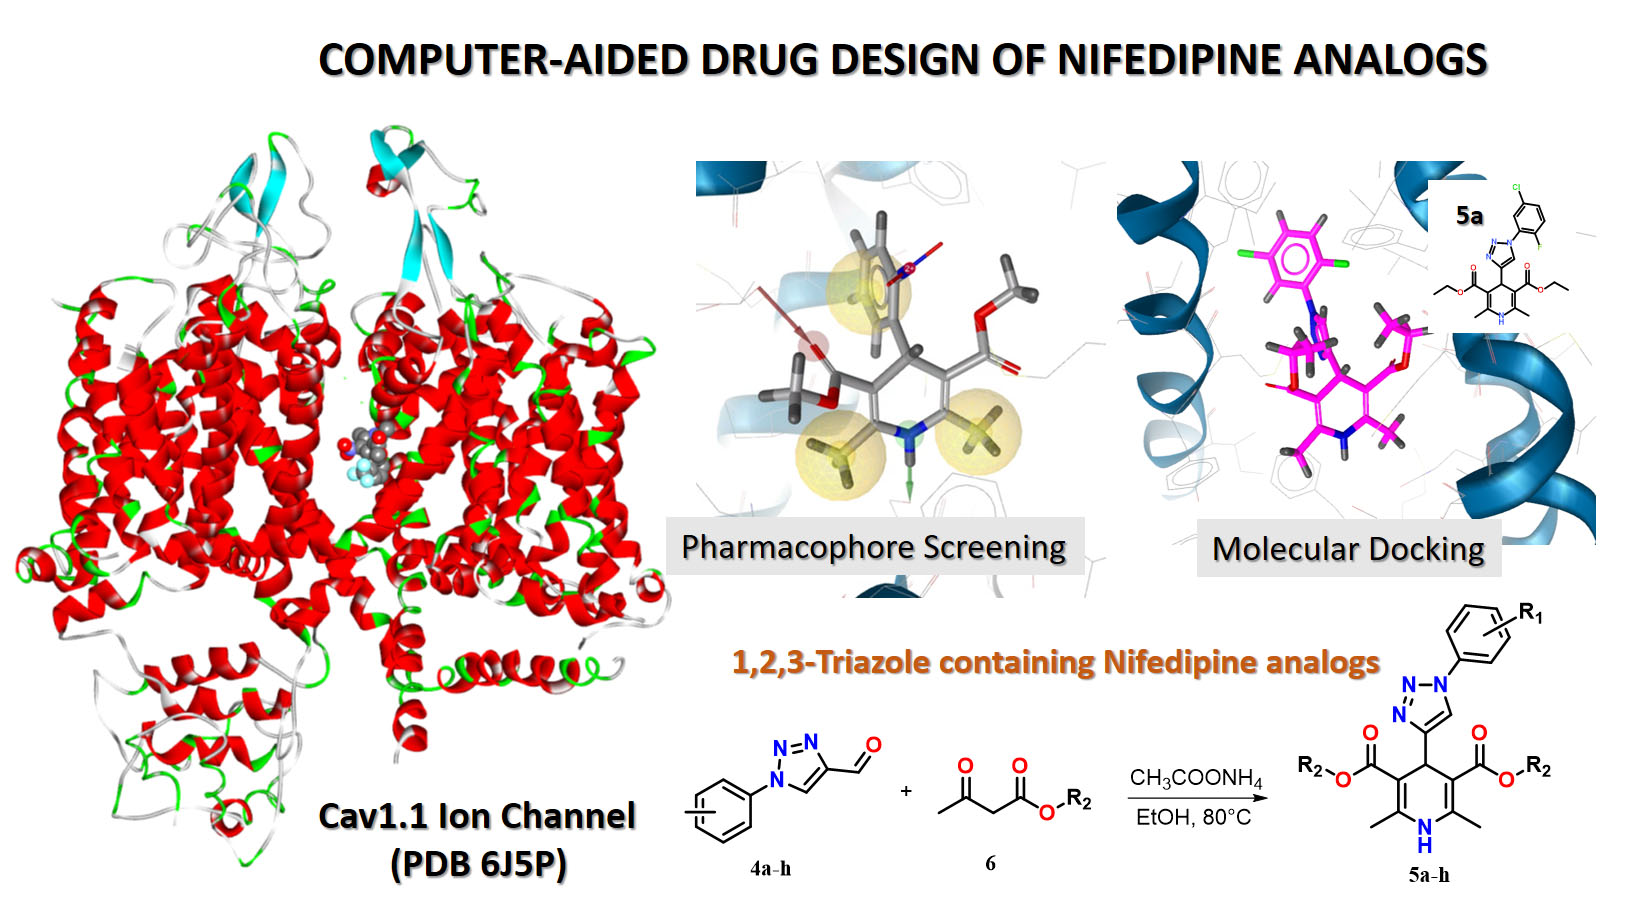 Computer-aided rational design and synthesis of new potential antihypertensive agents among 1,2,3-triazole-containing nifedipine analogs